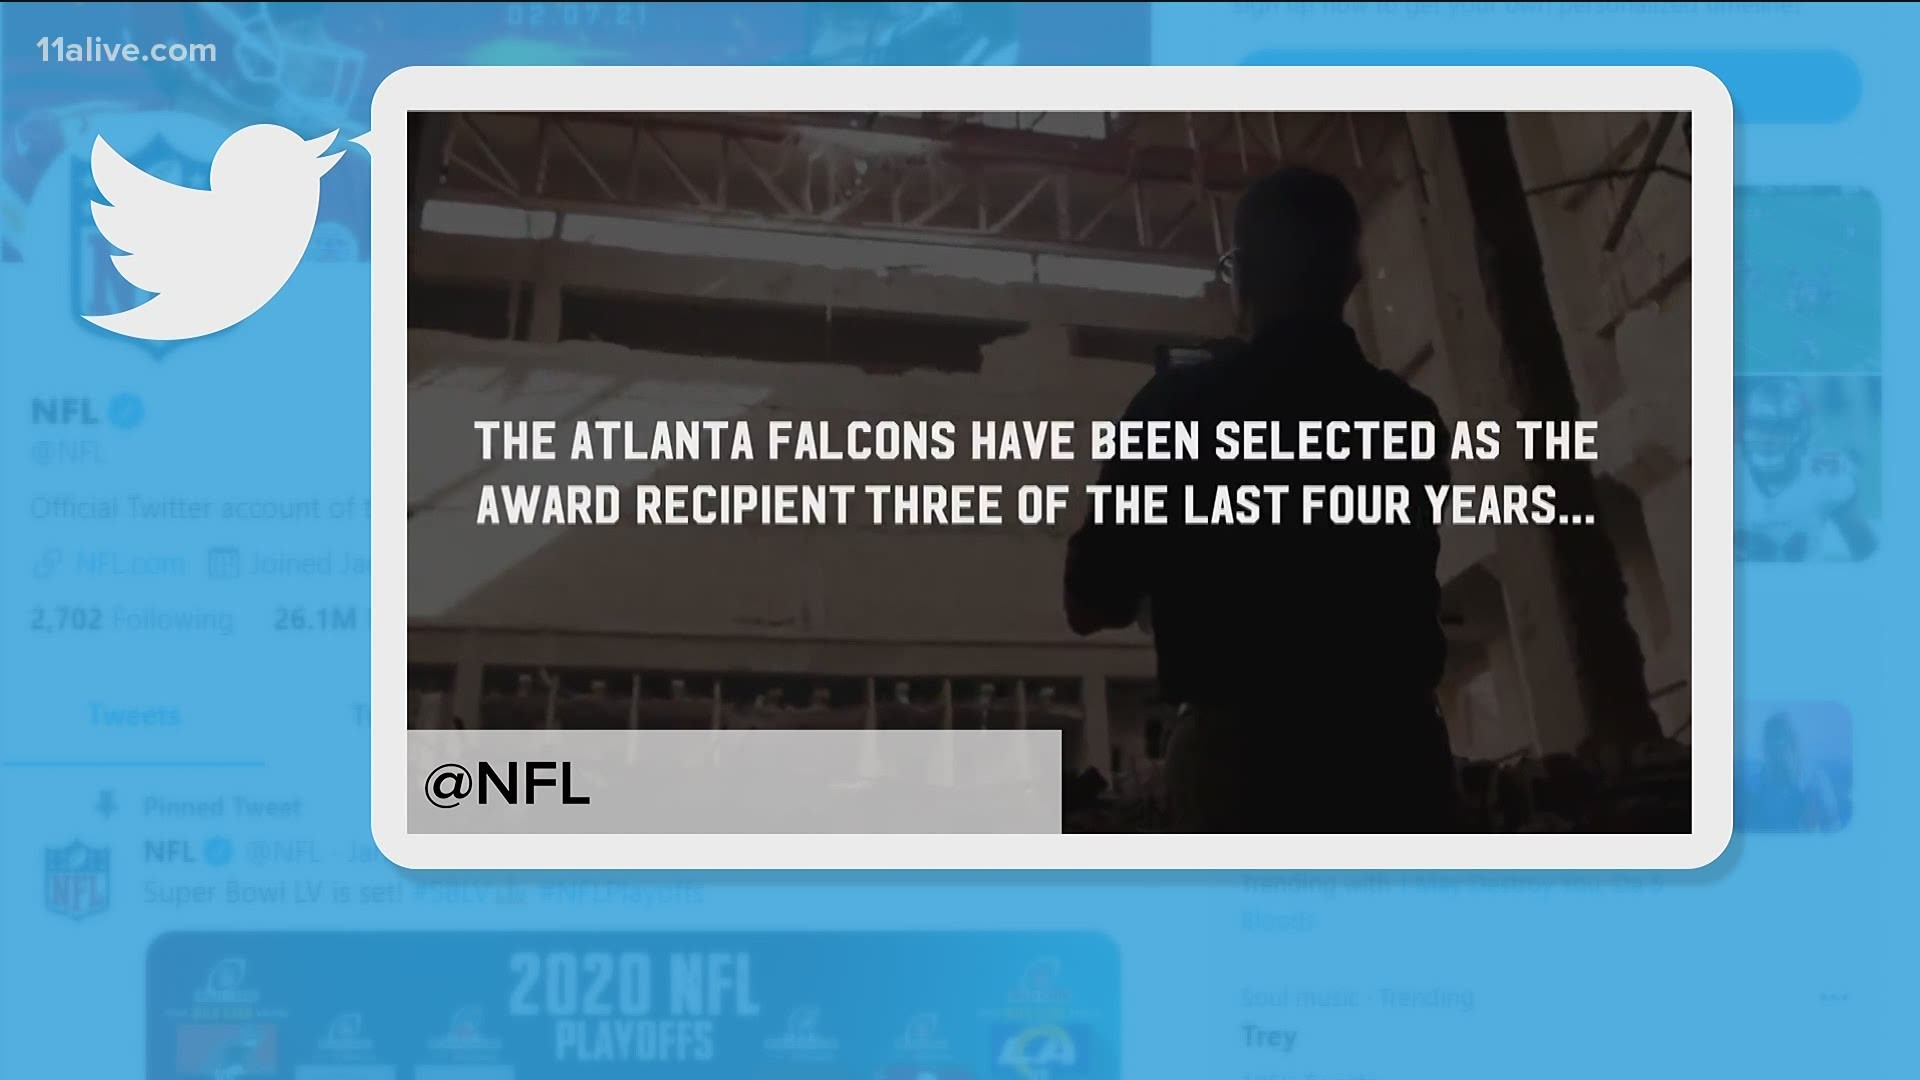 The Falcons have won the award four of the last five years.